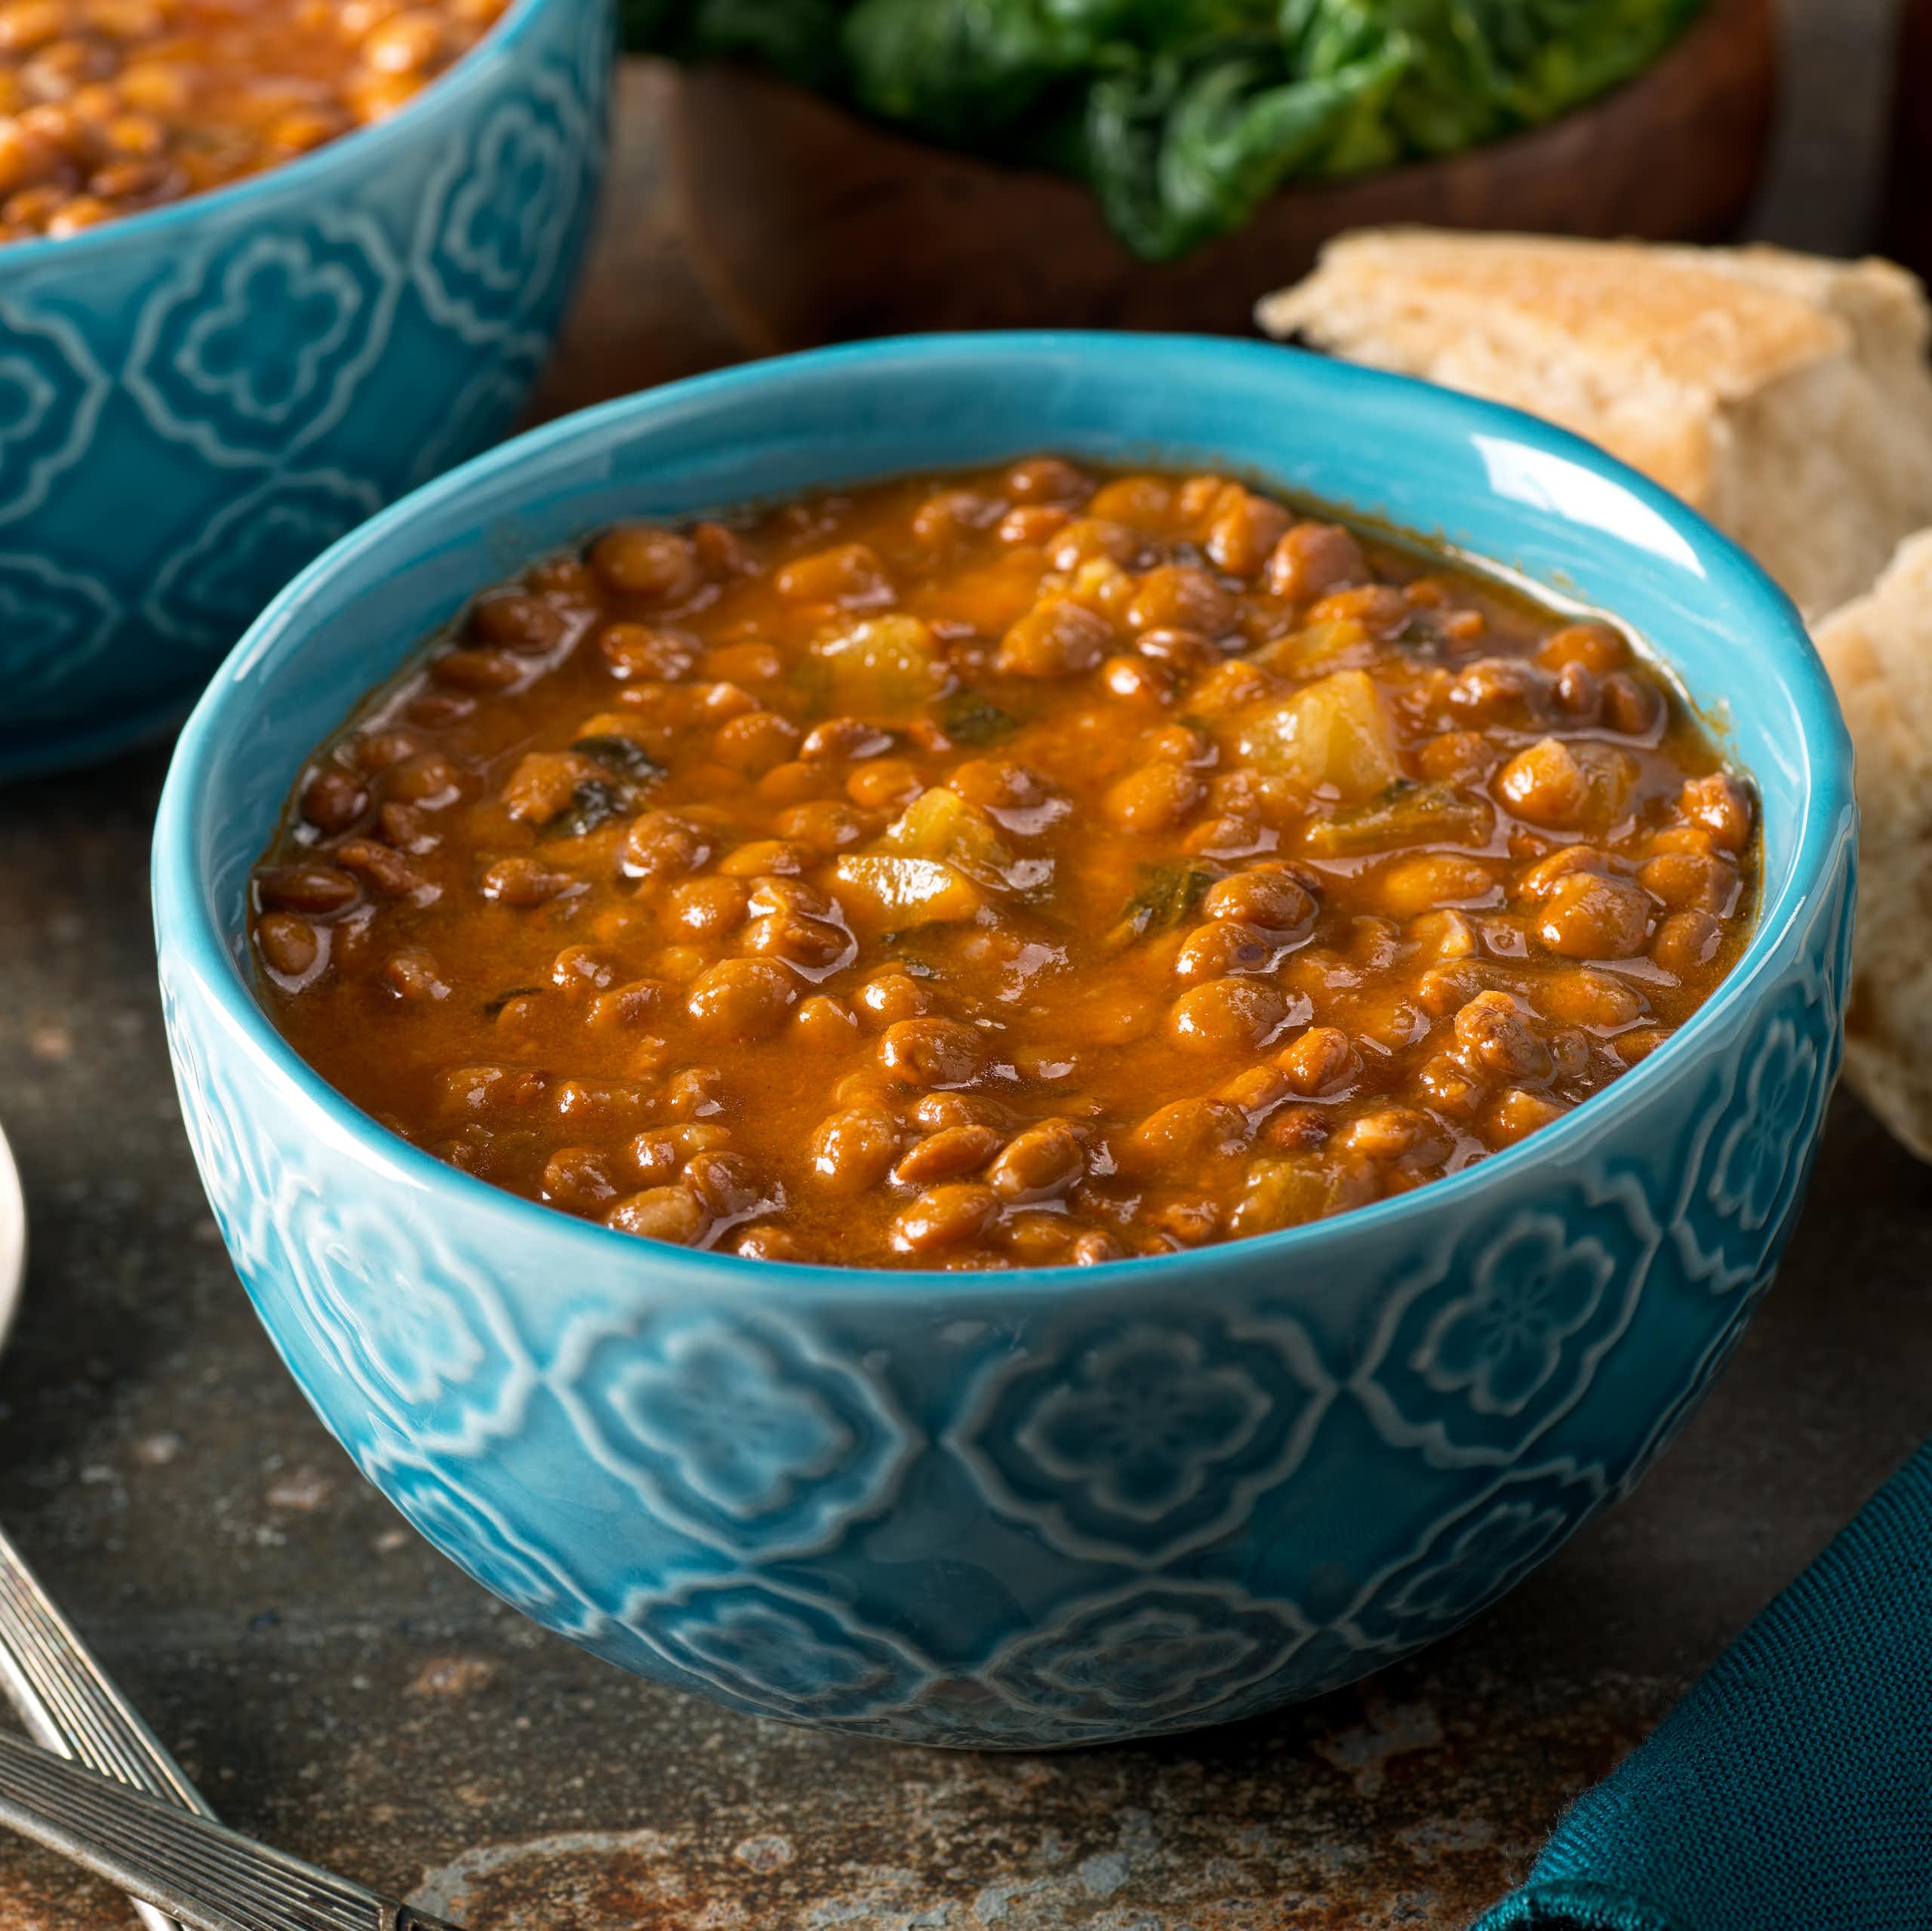 A bowlful of cooked lentils.